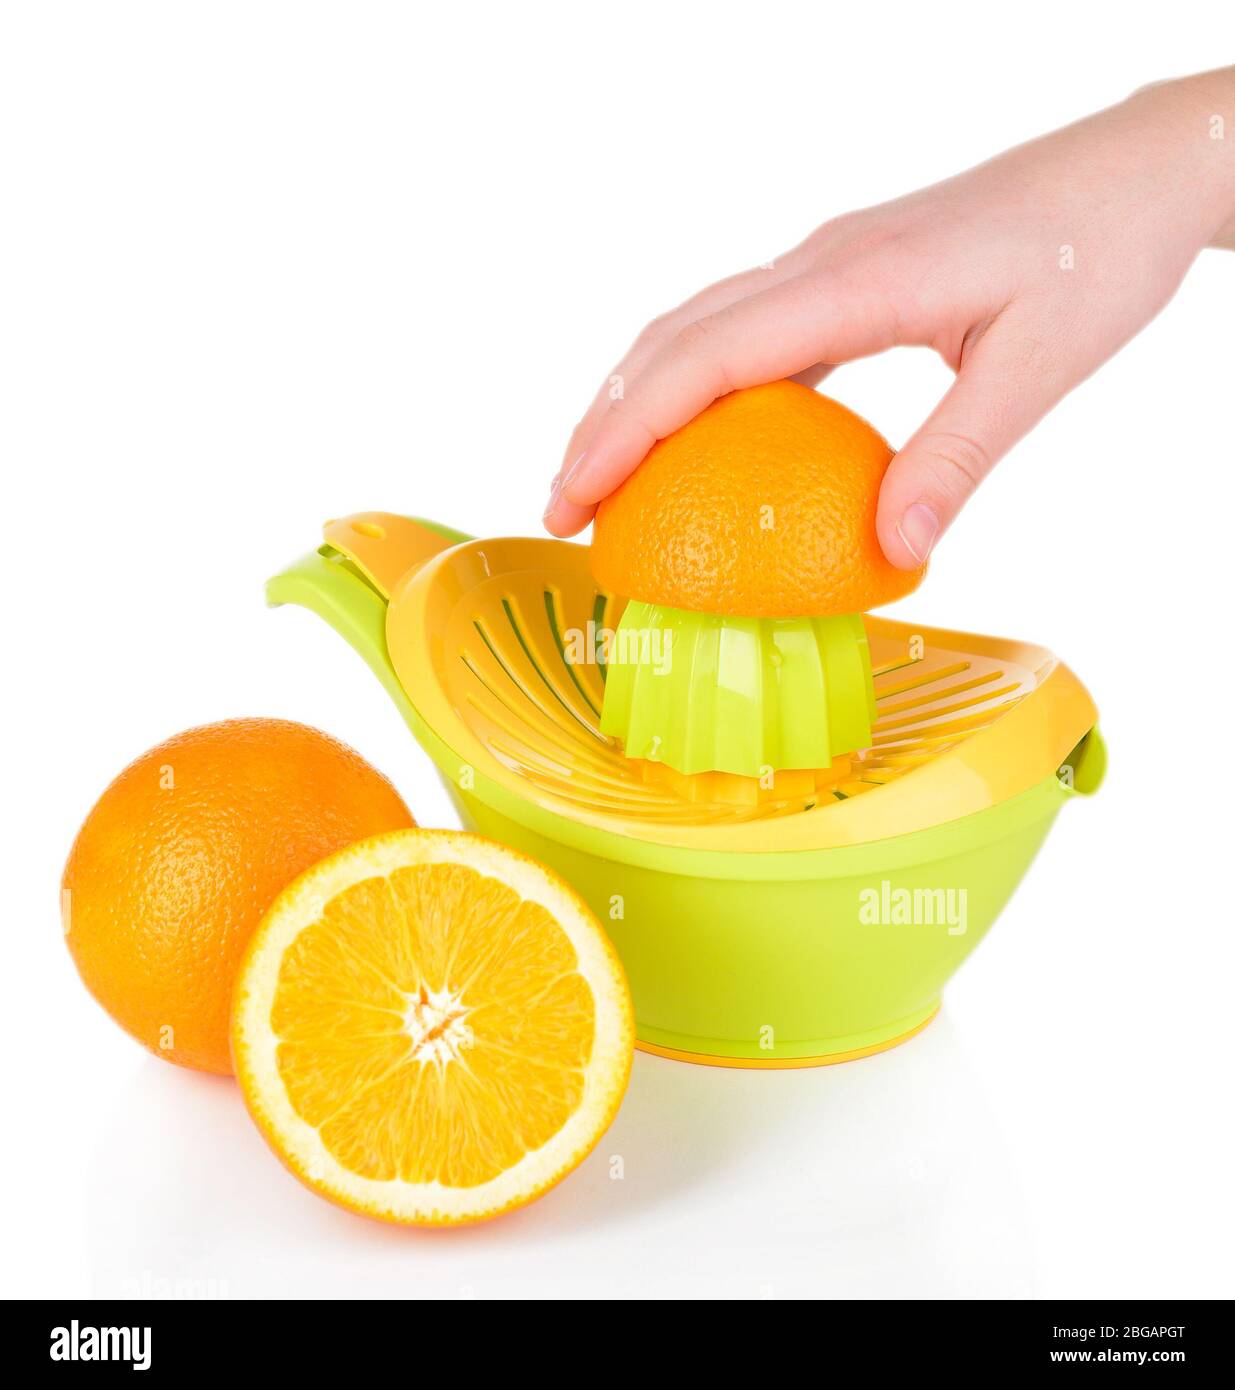 Juicer orange Cut Out Stock Images & Pictures - Page 2 - Alamy